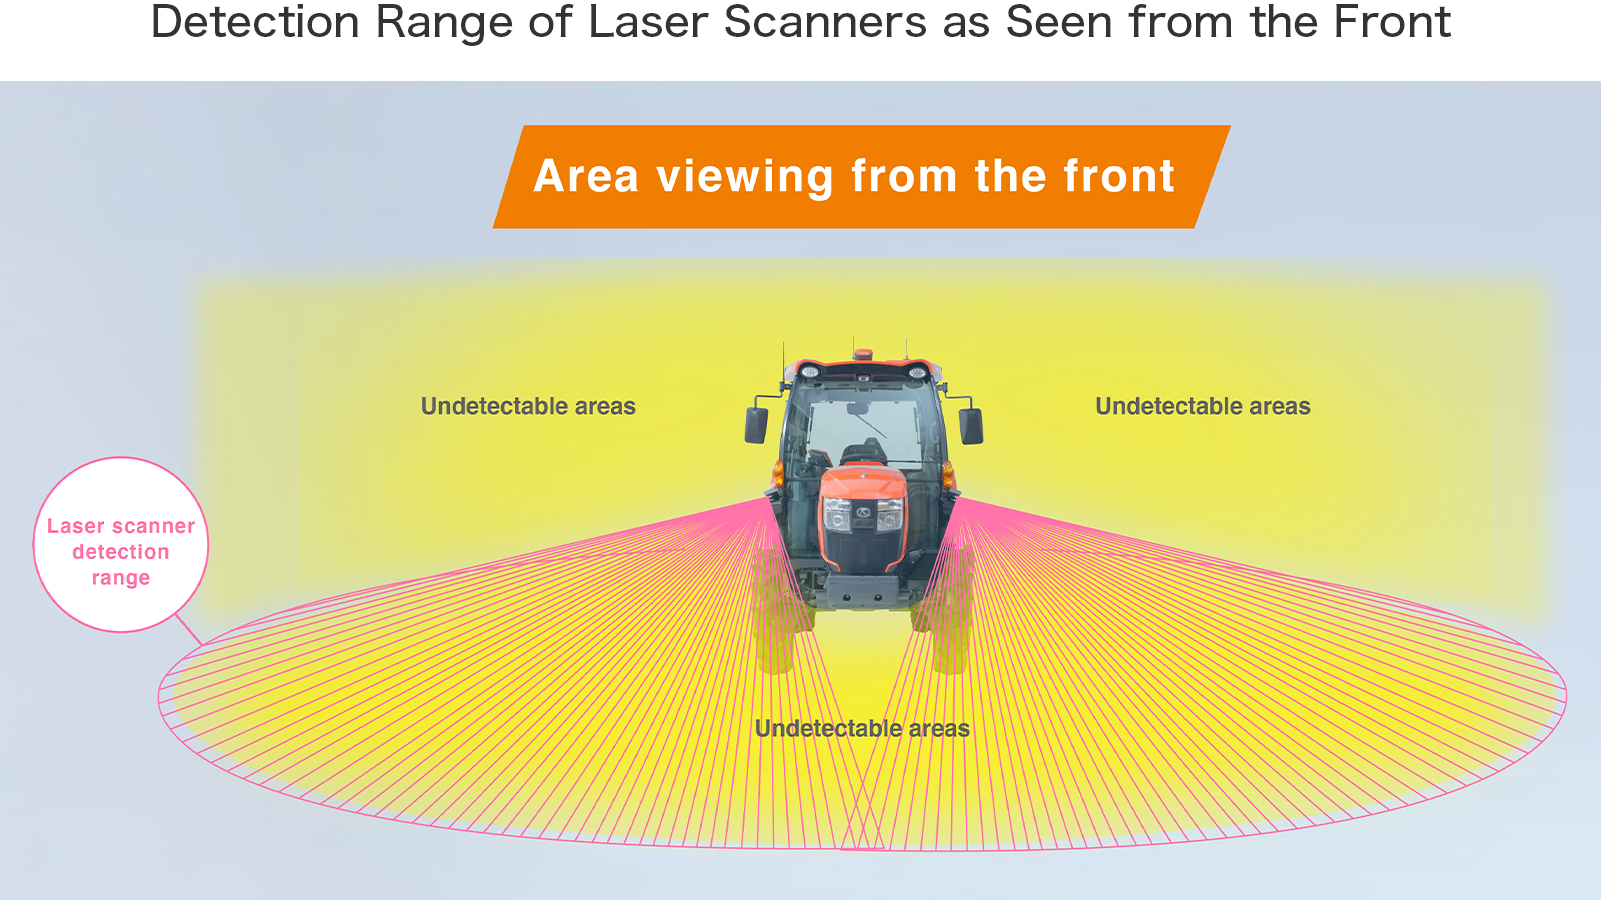 Detection Range of Laser Scanners as Seen from the Front